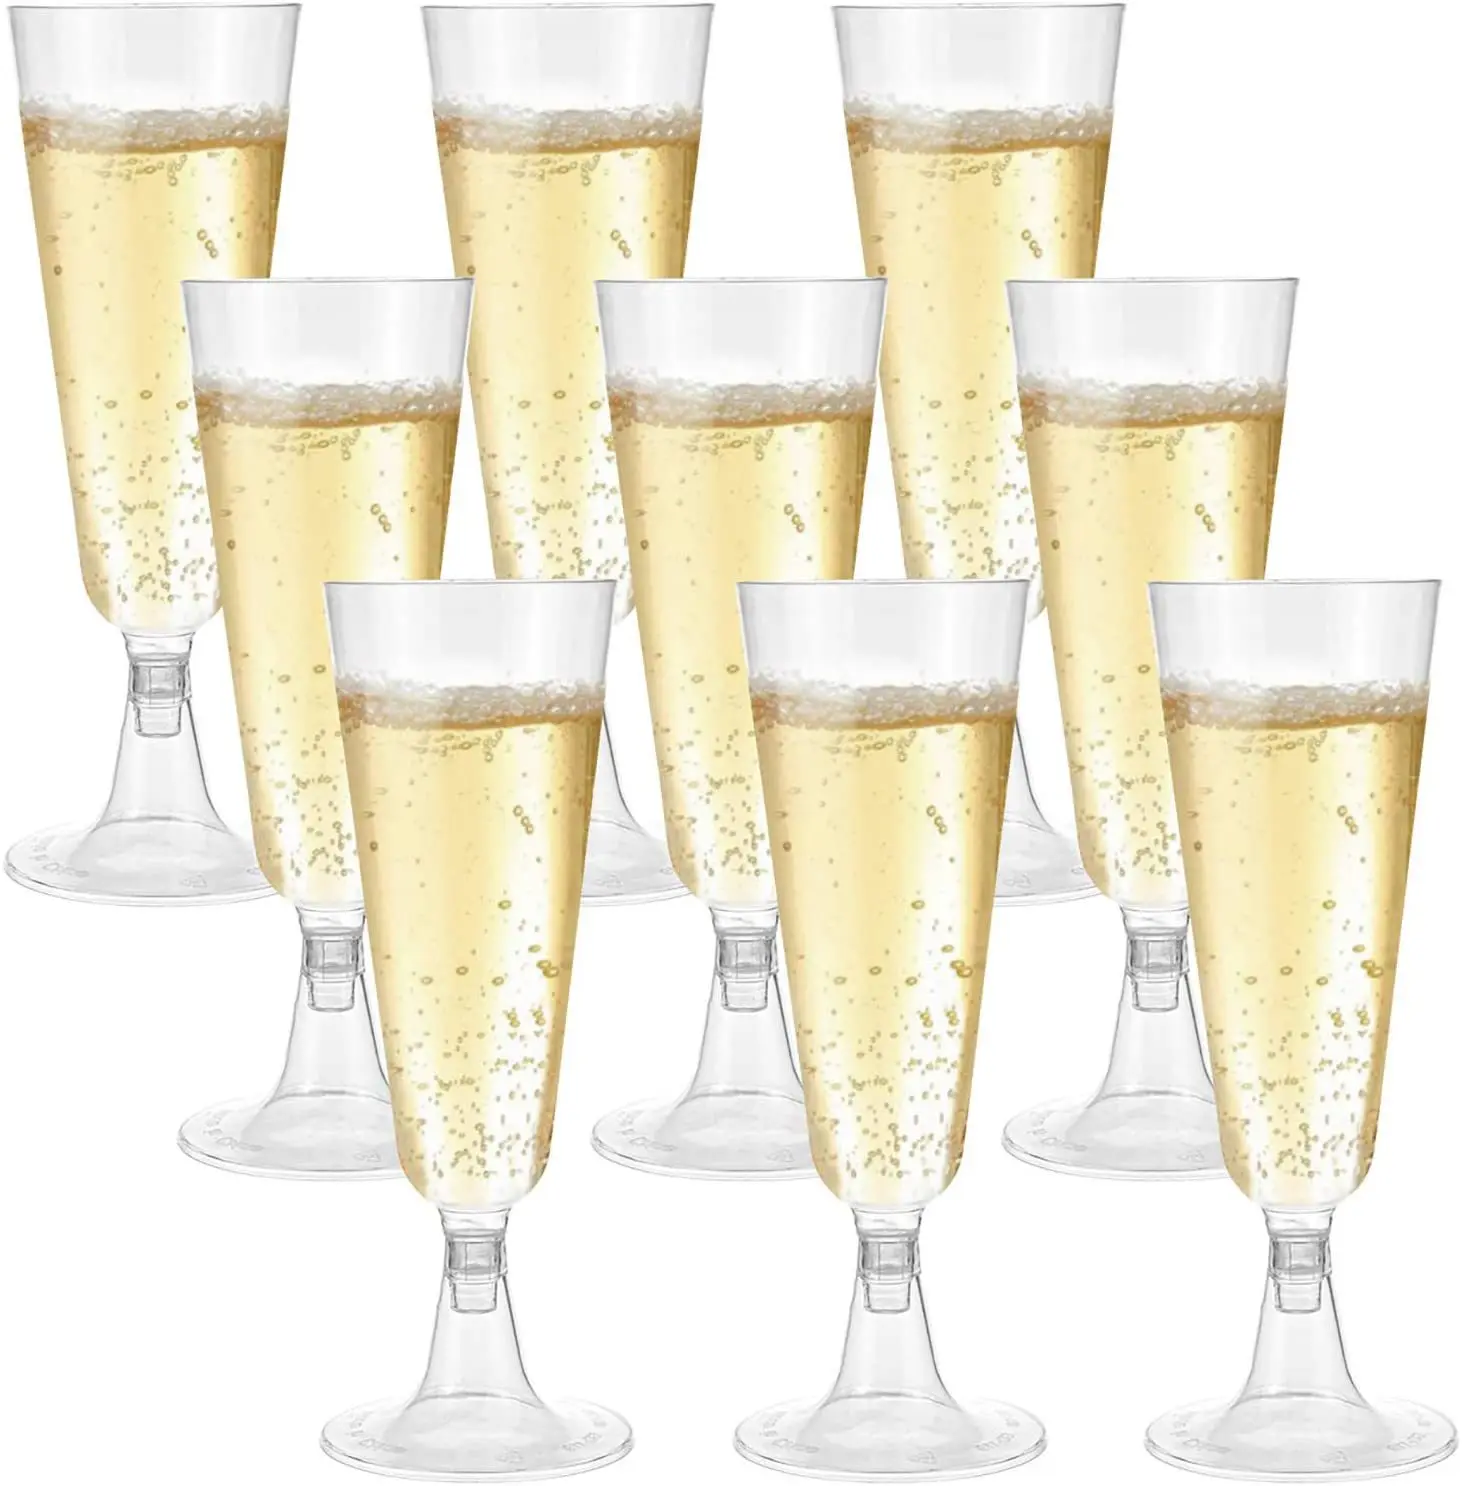 

25pcs 5OZ Champagne Cup Plastic Wine Glasses Clear Champagne Flutes Wine Birthday Parties Wedding Gold Rim Goblet Disposable Cup